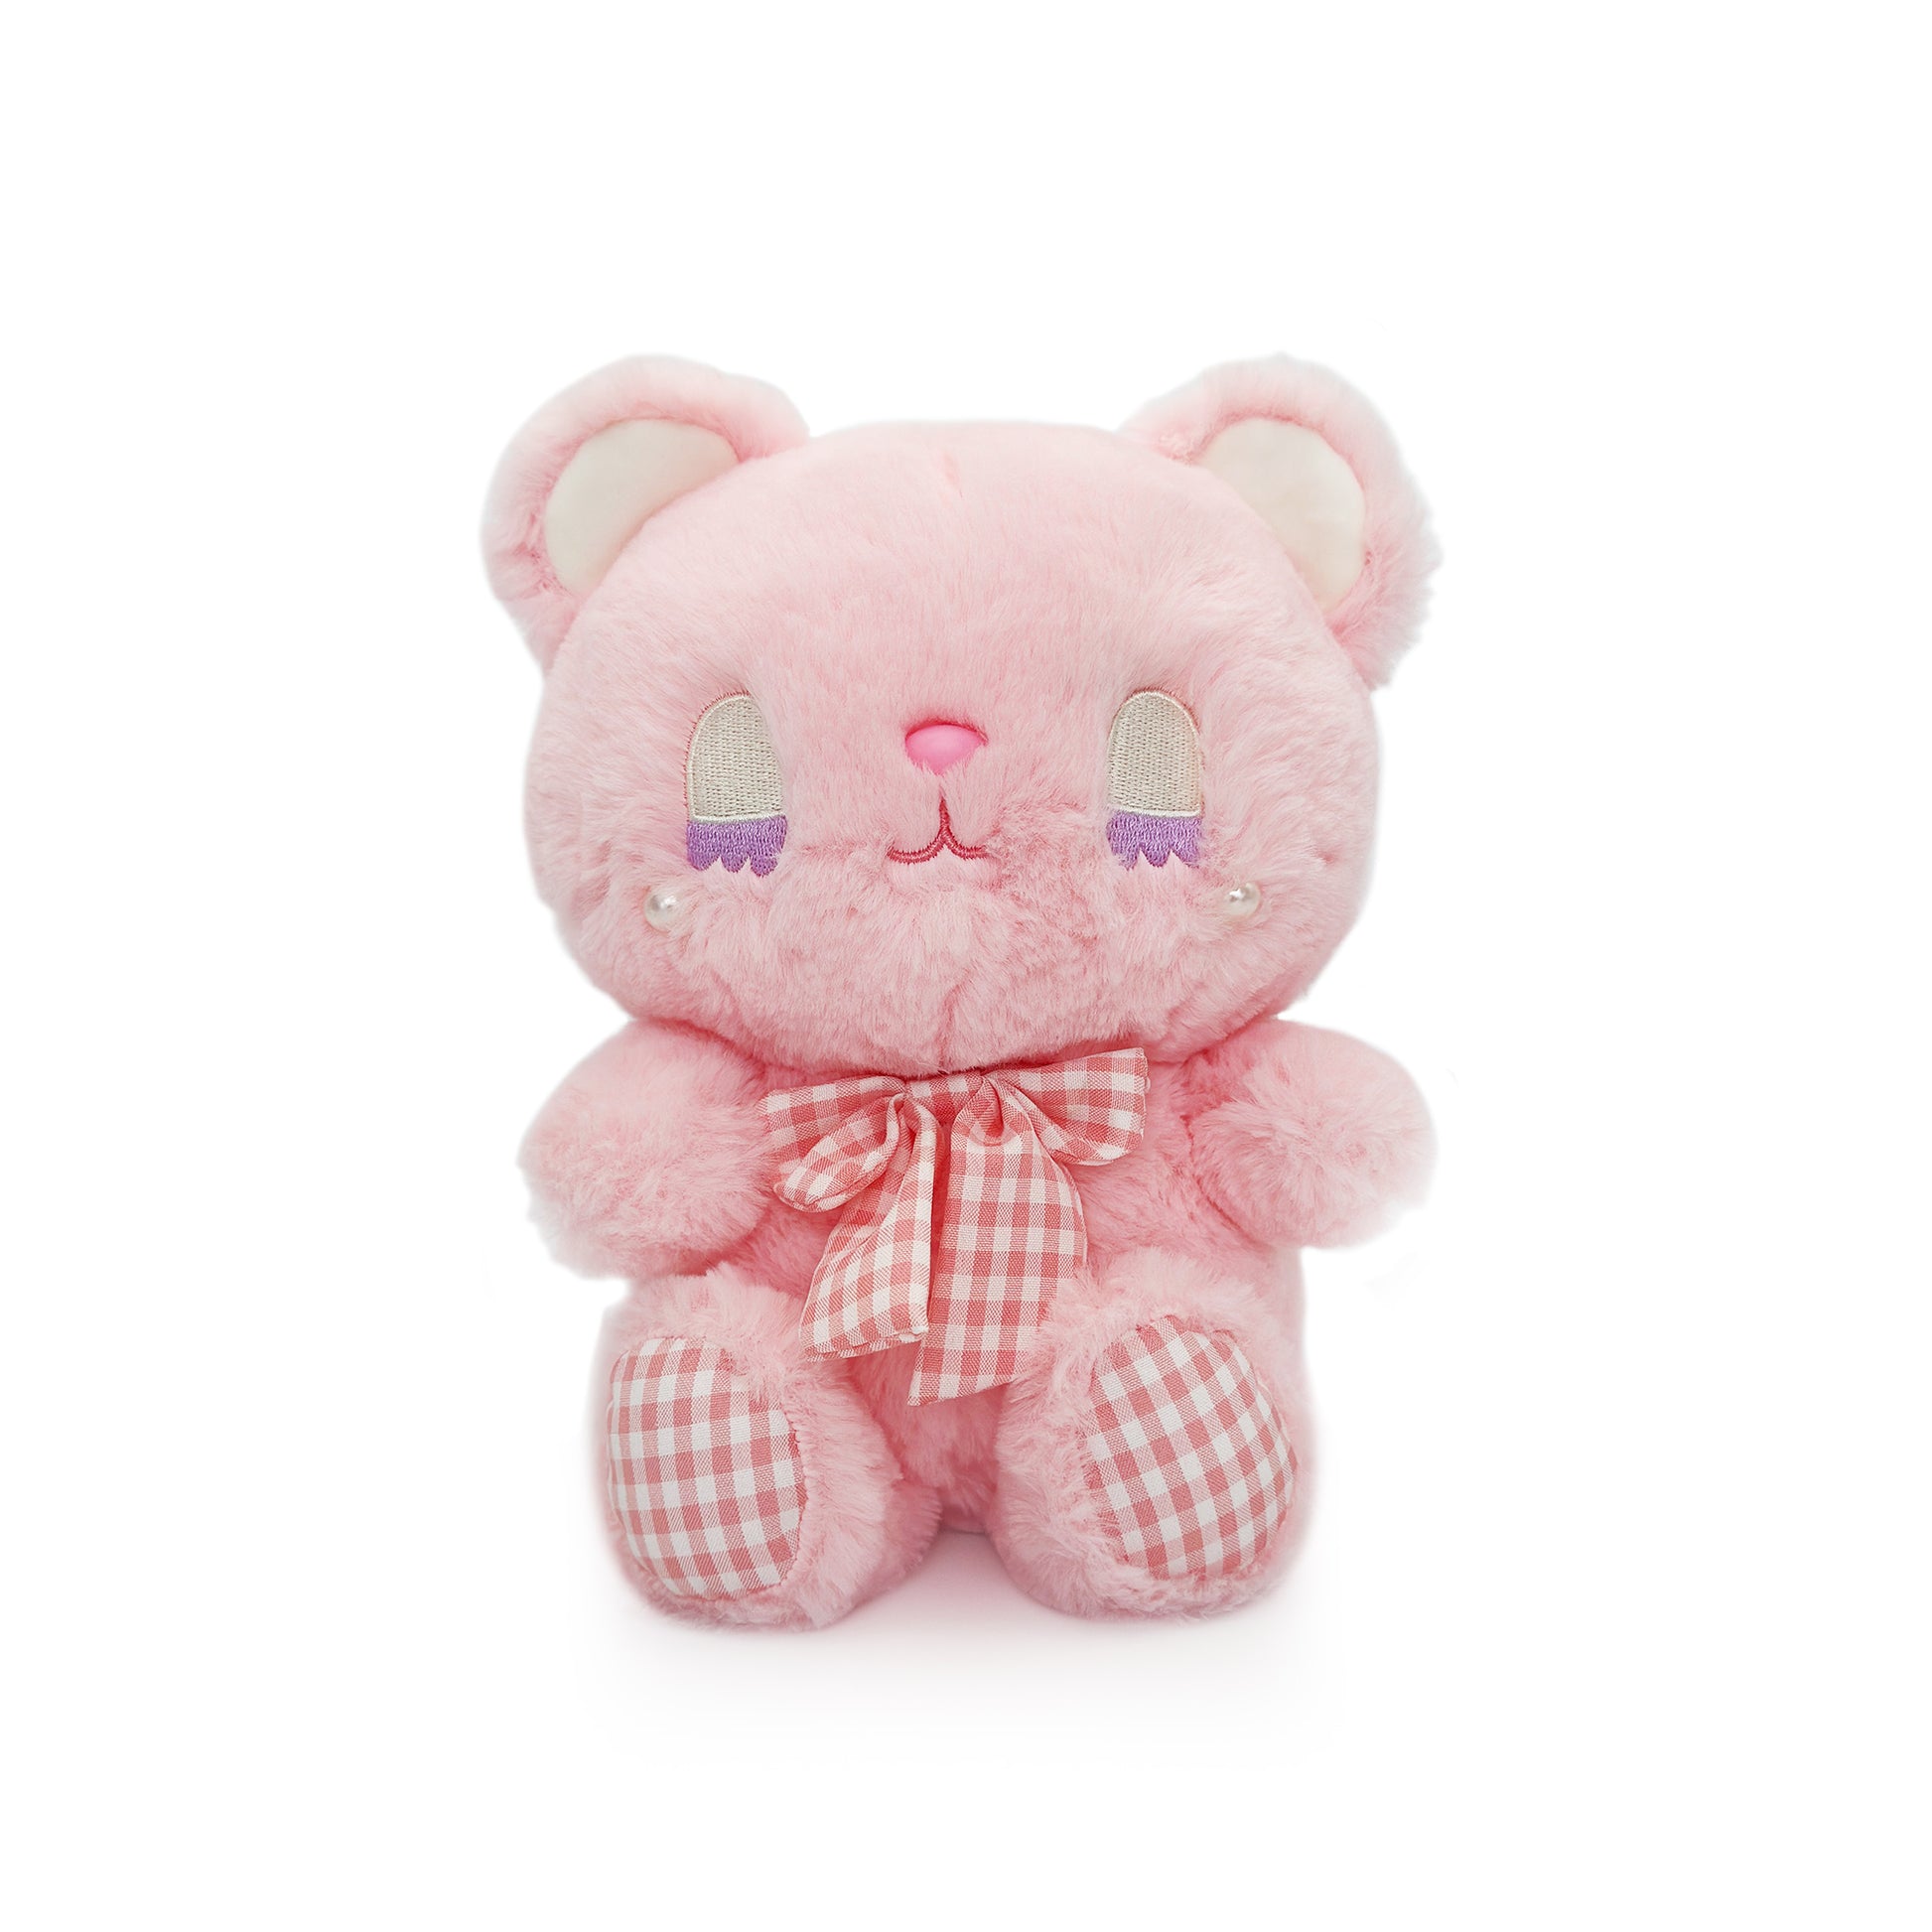 pink bear cute lovely stuffed animal PlushThis